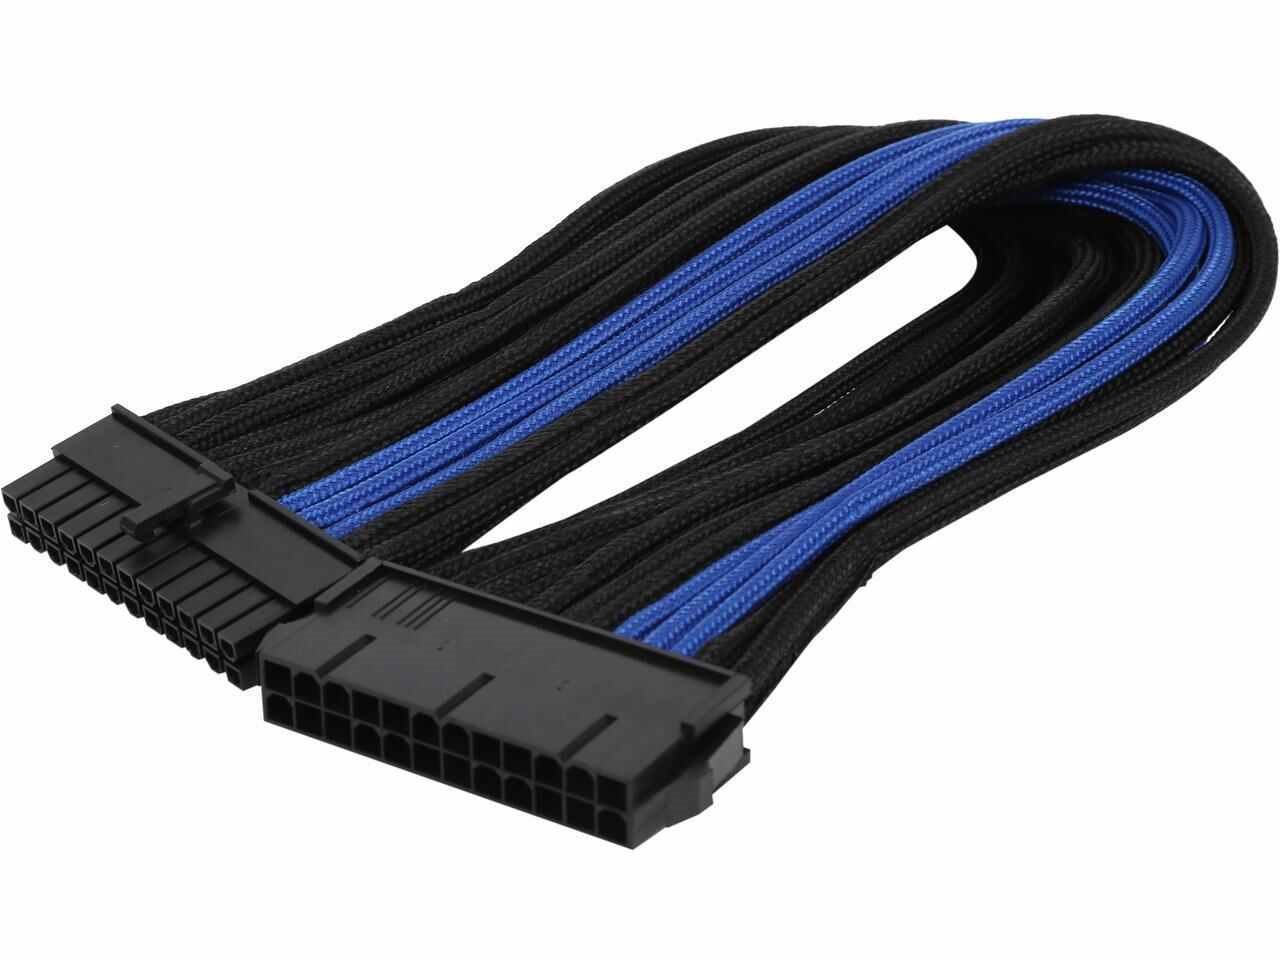 Silverstone Pp07-Mbba Motherboard 24Pin Connector Sleeved Extension Power Supply Cable Black & Blue Female To Male